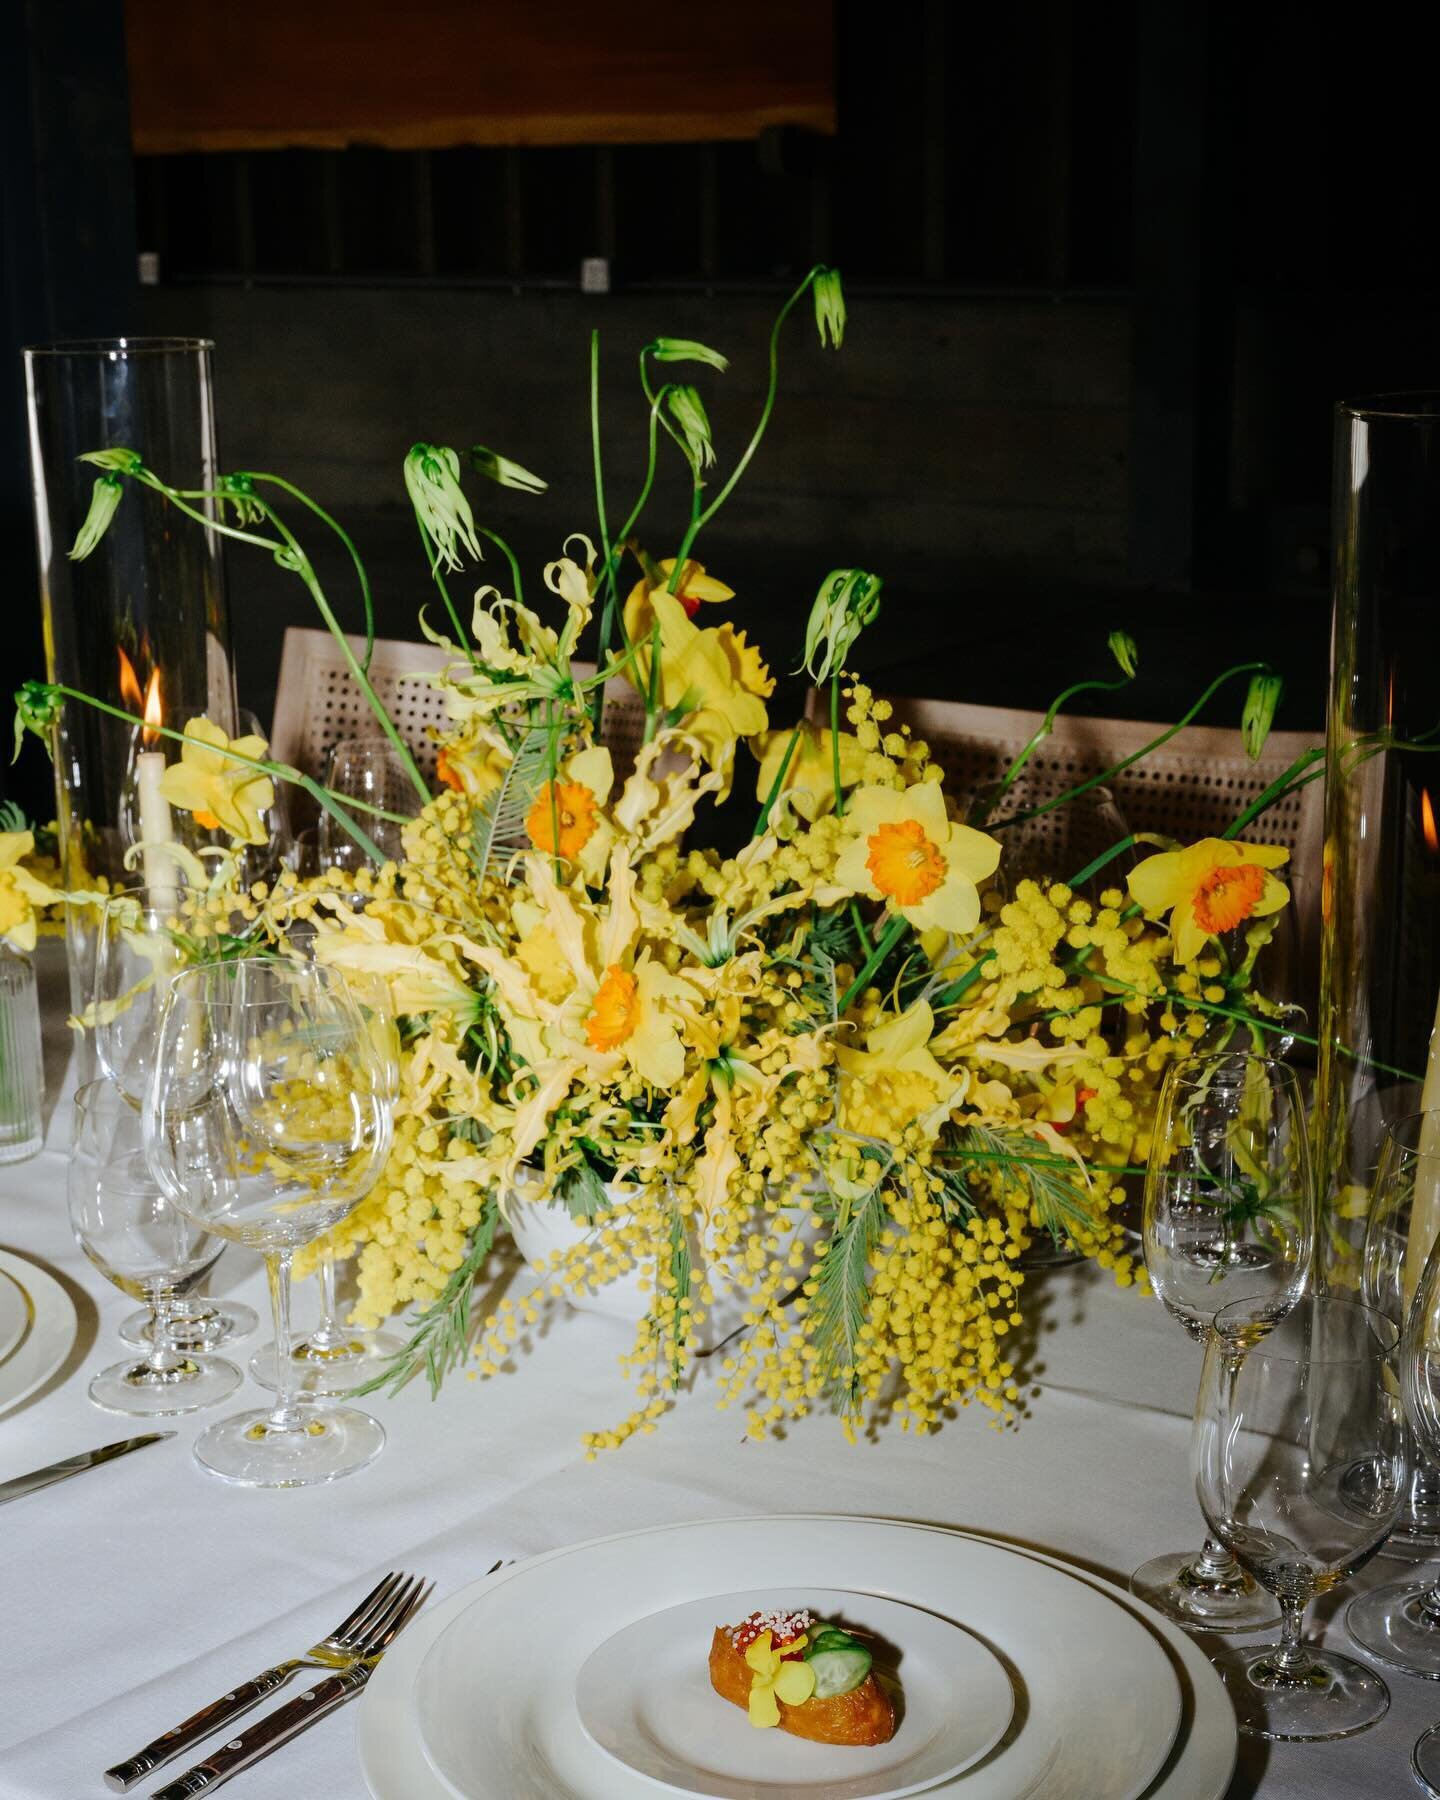 💛 Completely in my element with this one 💛 the mimosa and daffodils I foraged locally and the gloriosa lilies from @mayeshsanfrancisco 
Getting to create with no limits or bounds is so cathartic for me. I spend so much time working to bring other p